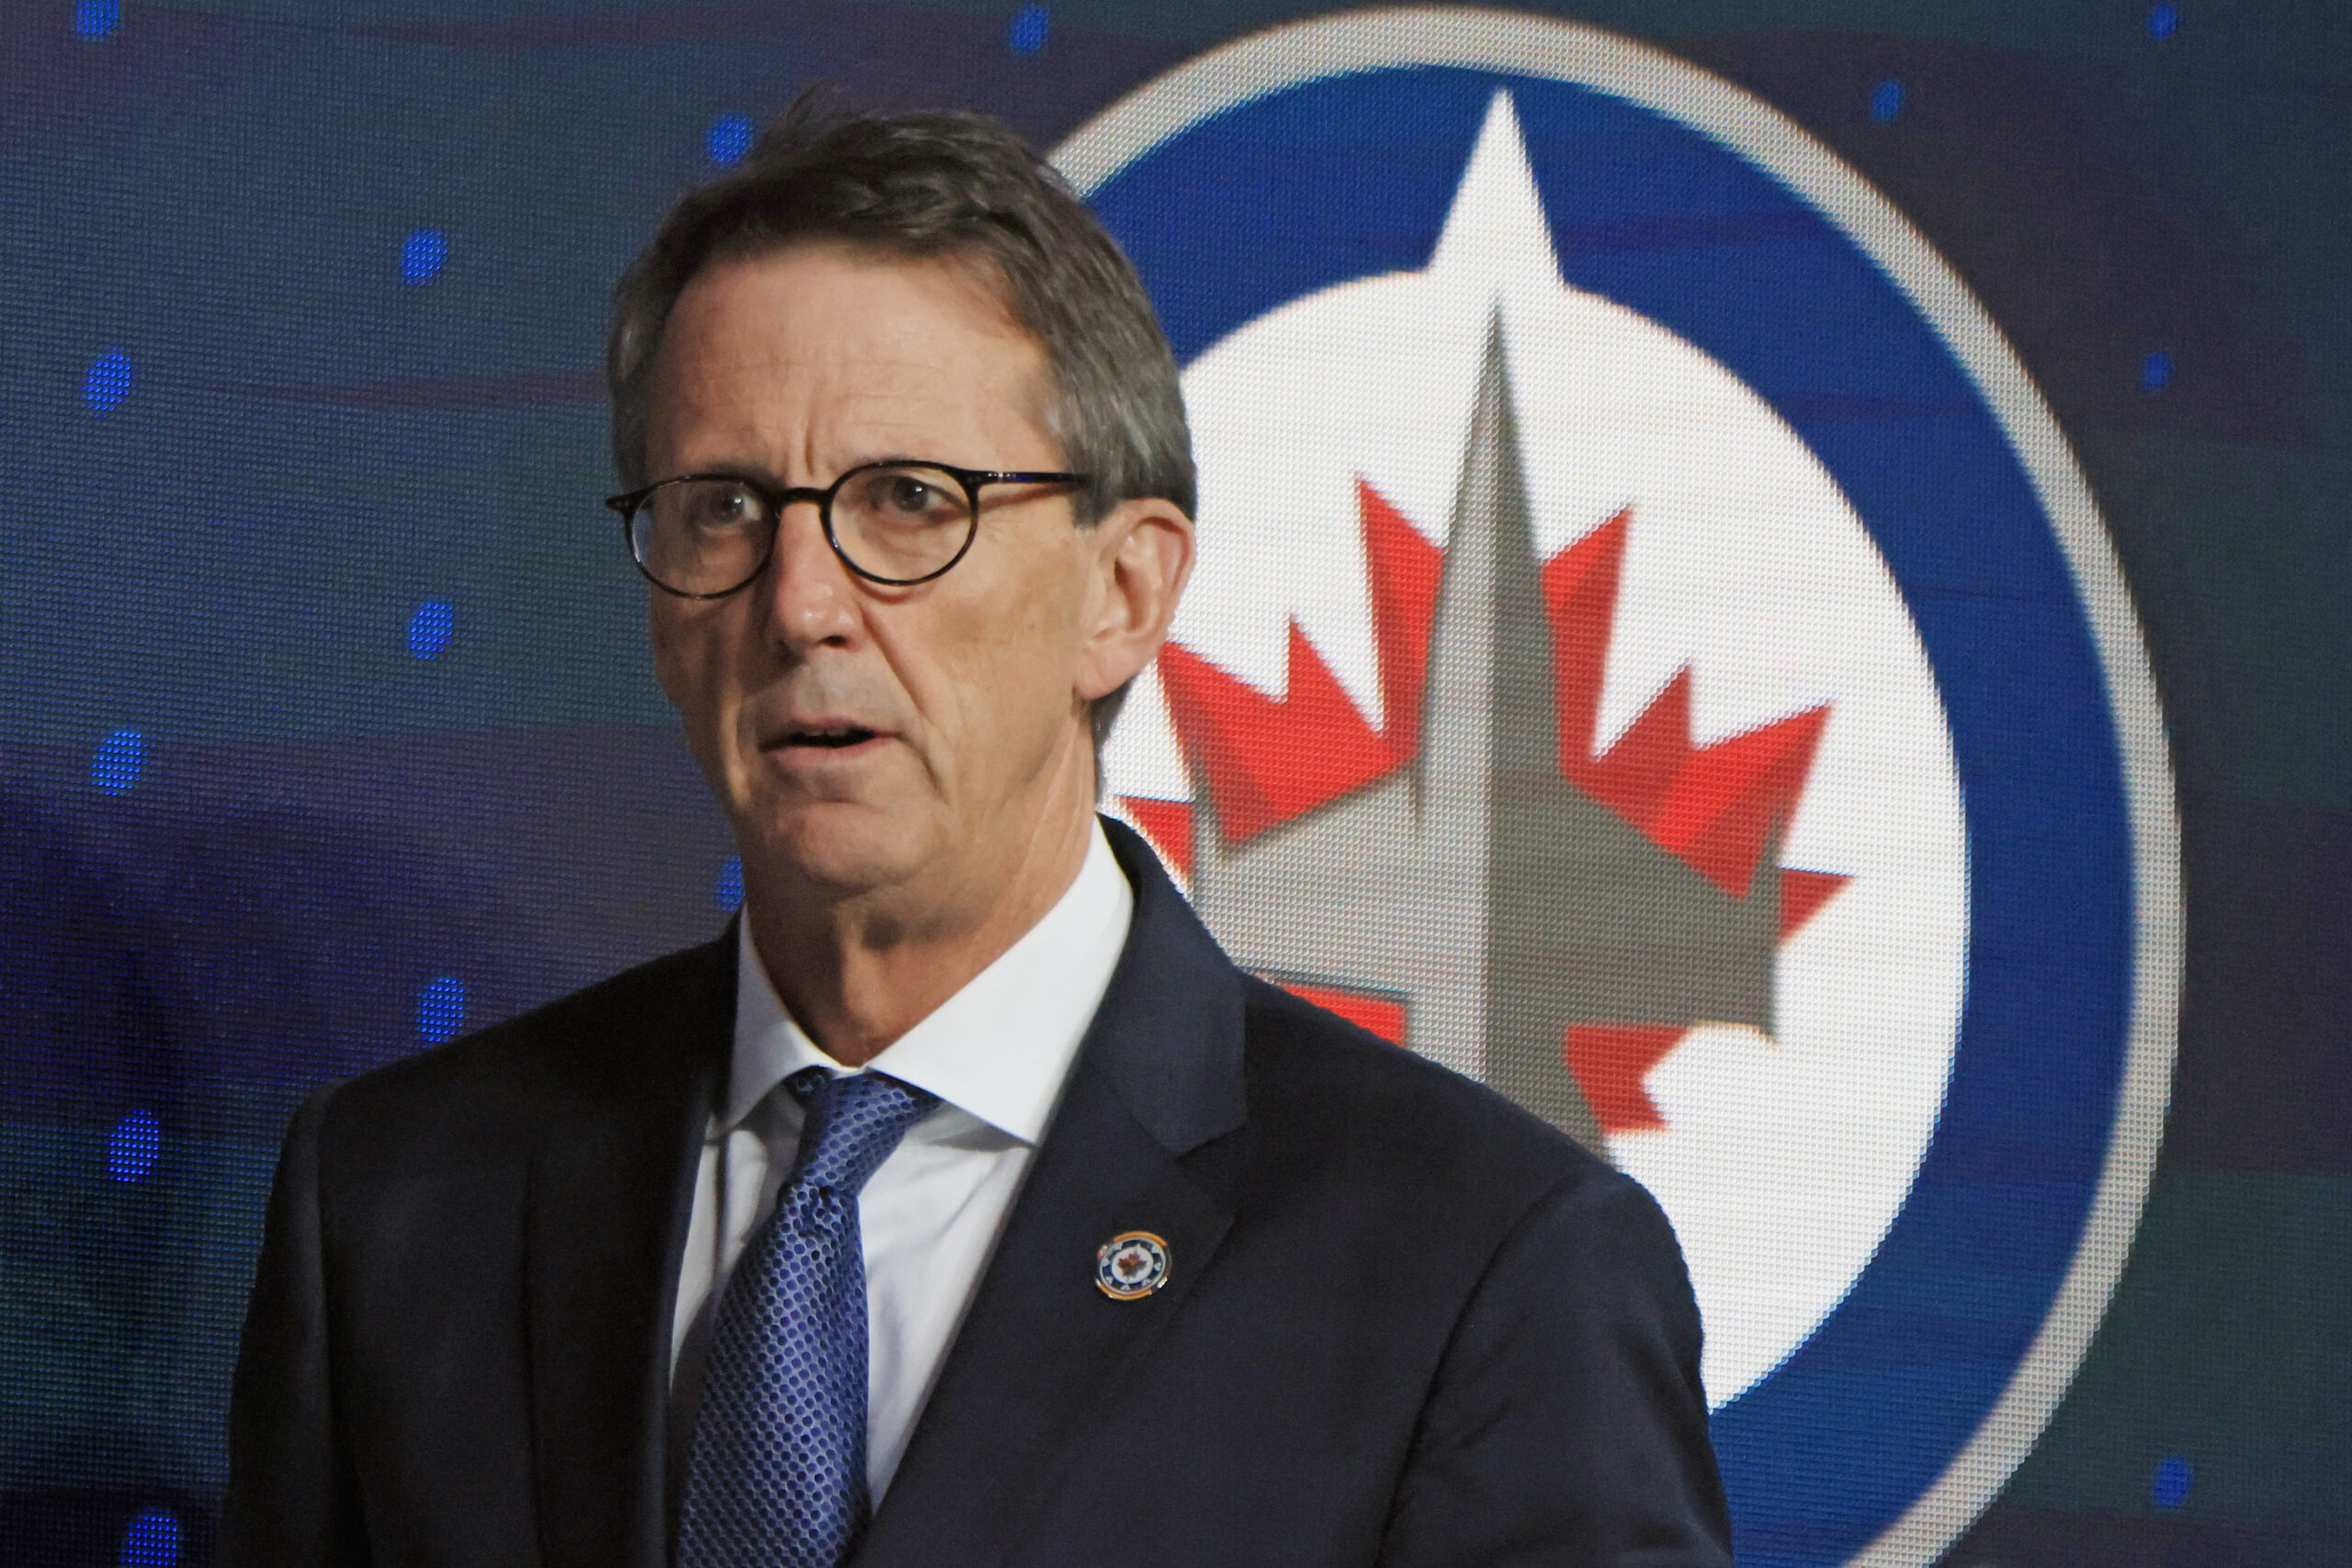 TSN on X: Per @DarrenDreger, the Oilers have reached a verbal